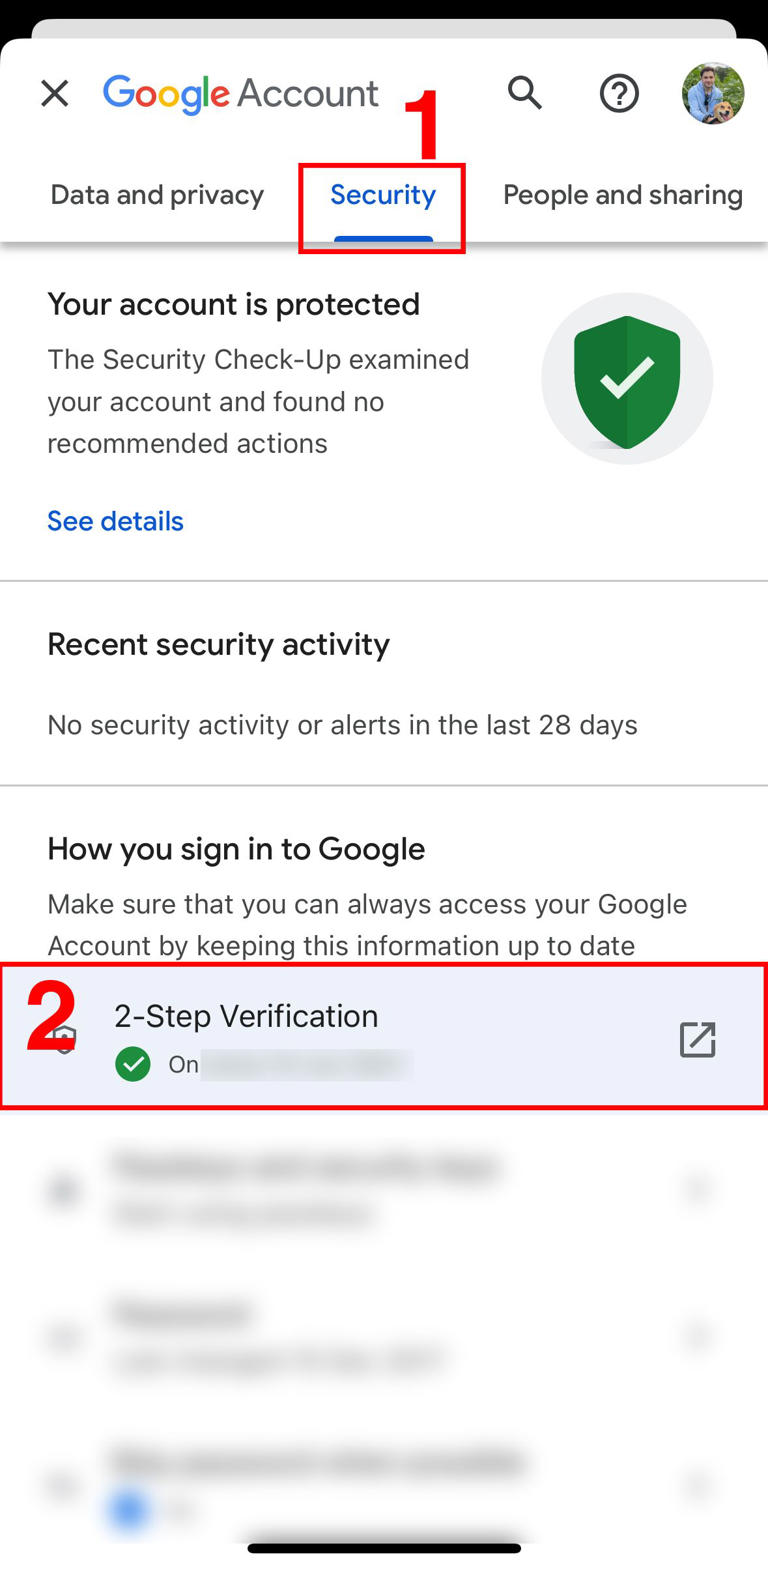 Google Account security section showing 2-Step Verification enabled and no recent security alerts.